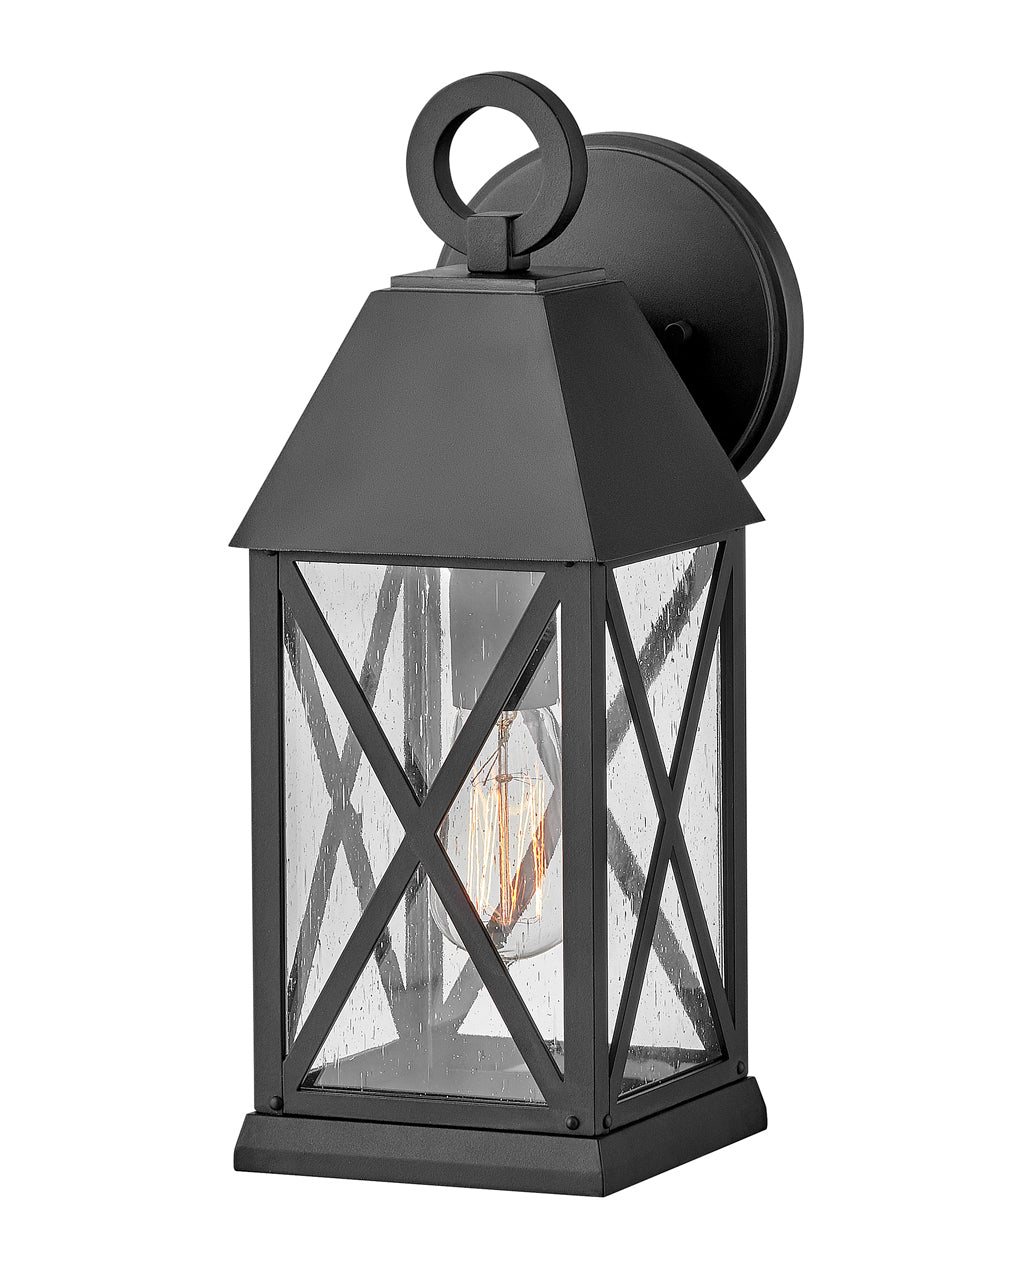 OUTDOOR BRIAR Wall Mount Lantern Outdoor l Wall Hinkley Museum Black 7.25x6.0x16.0 